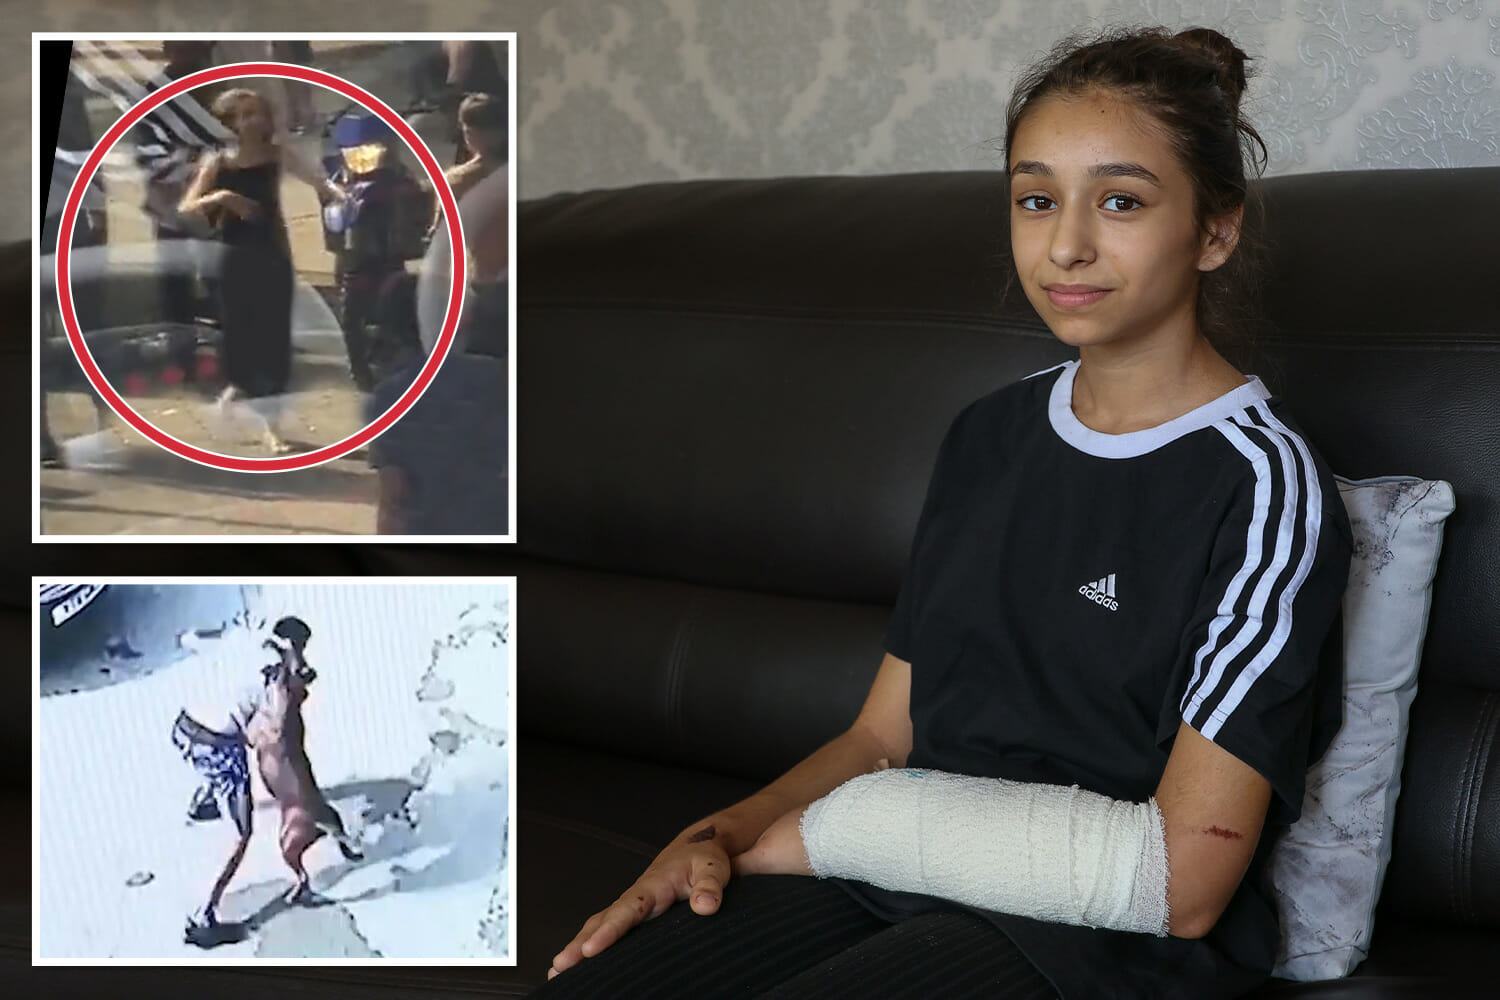 I thought I'd die when I was mauled by savage XL Bully, 11-year-old girl reveals as new vid shows attack that injured 3